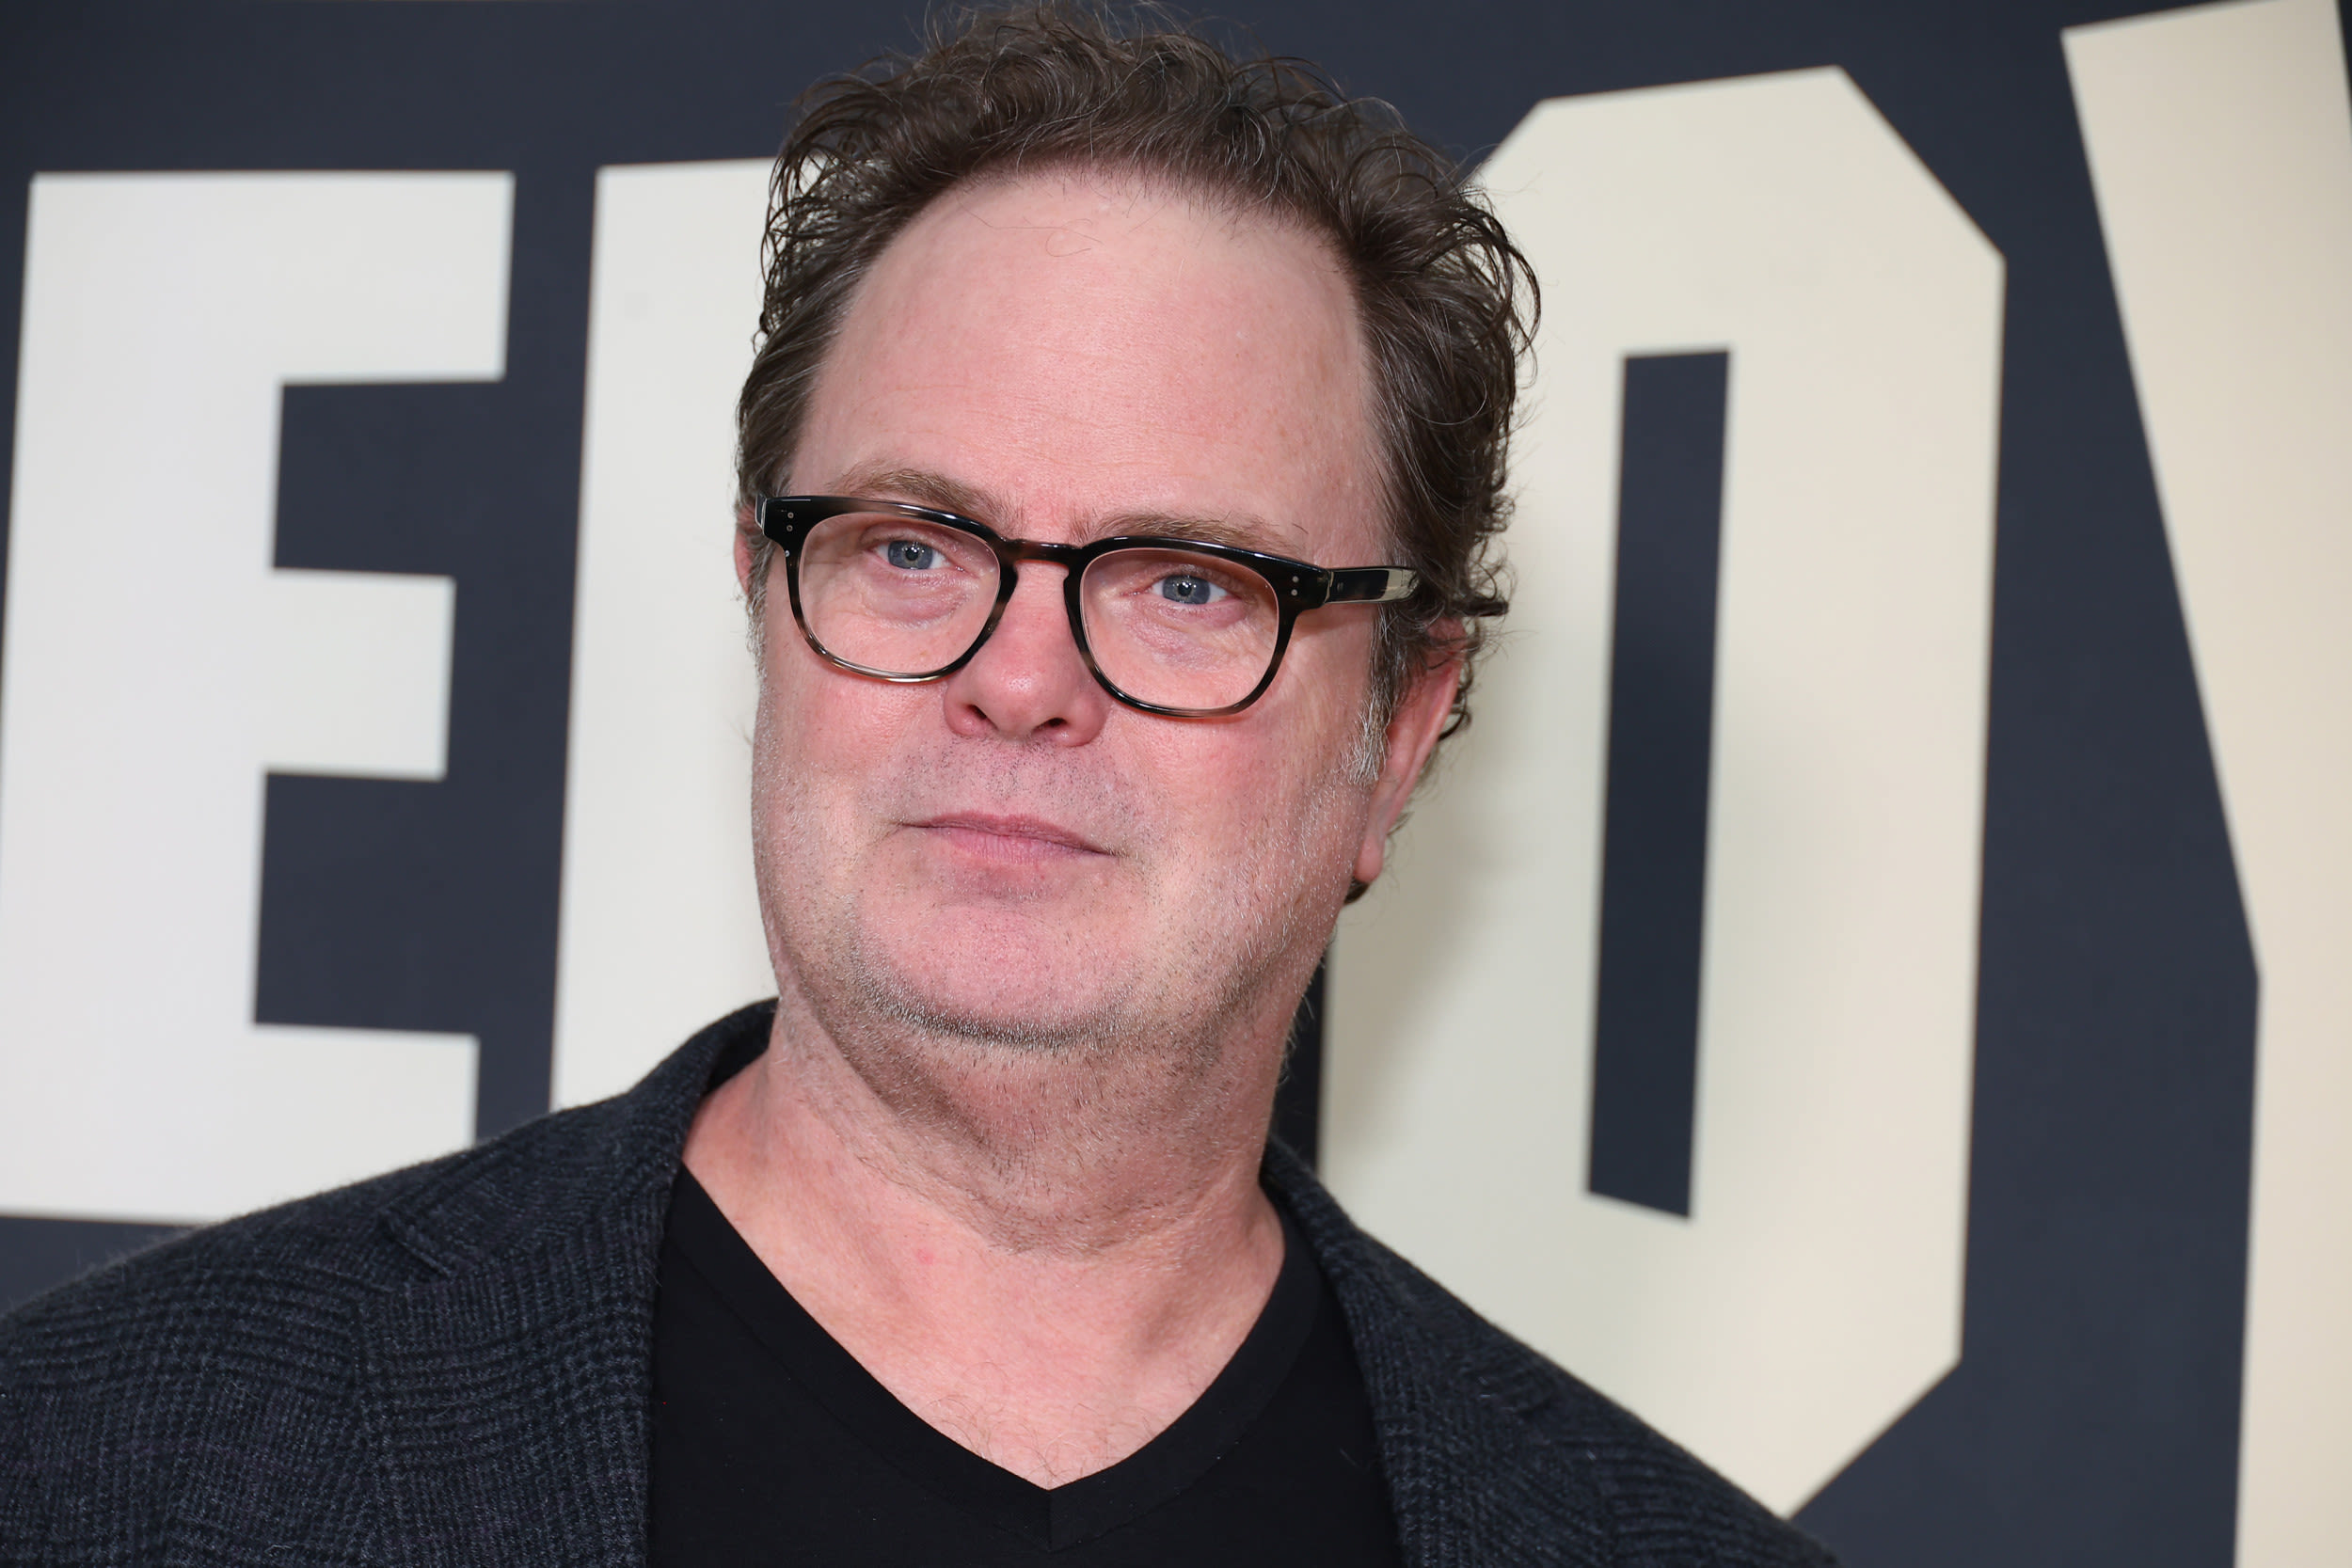 'The Office' star Rainn Wilson says he's open to appearing on new spinoff